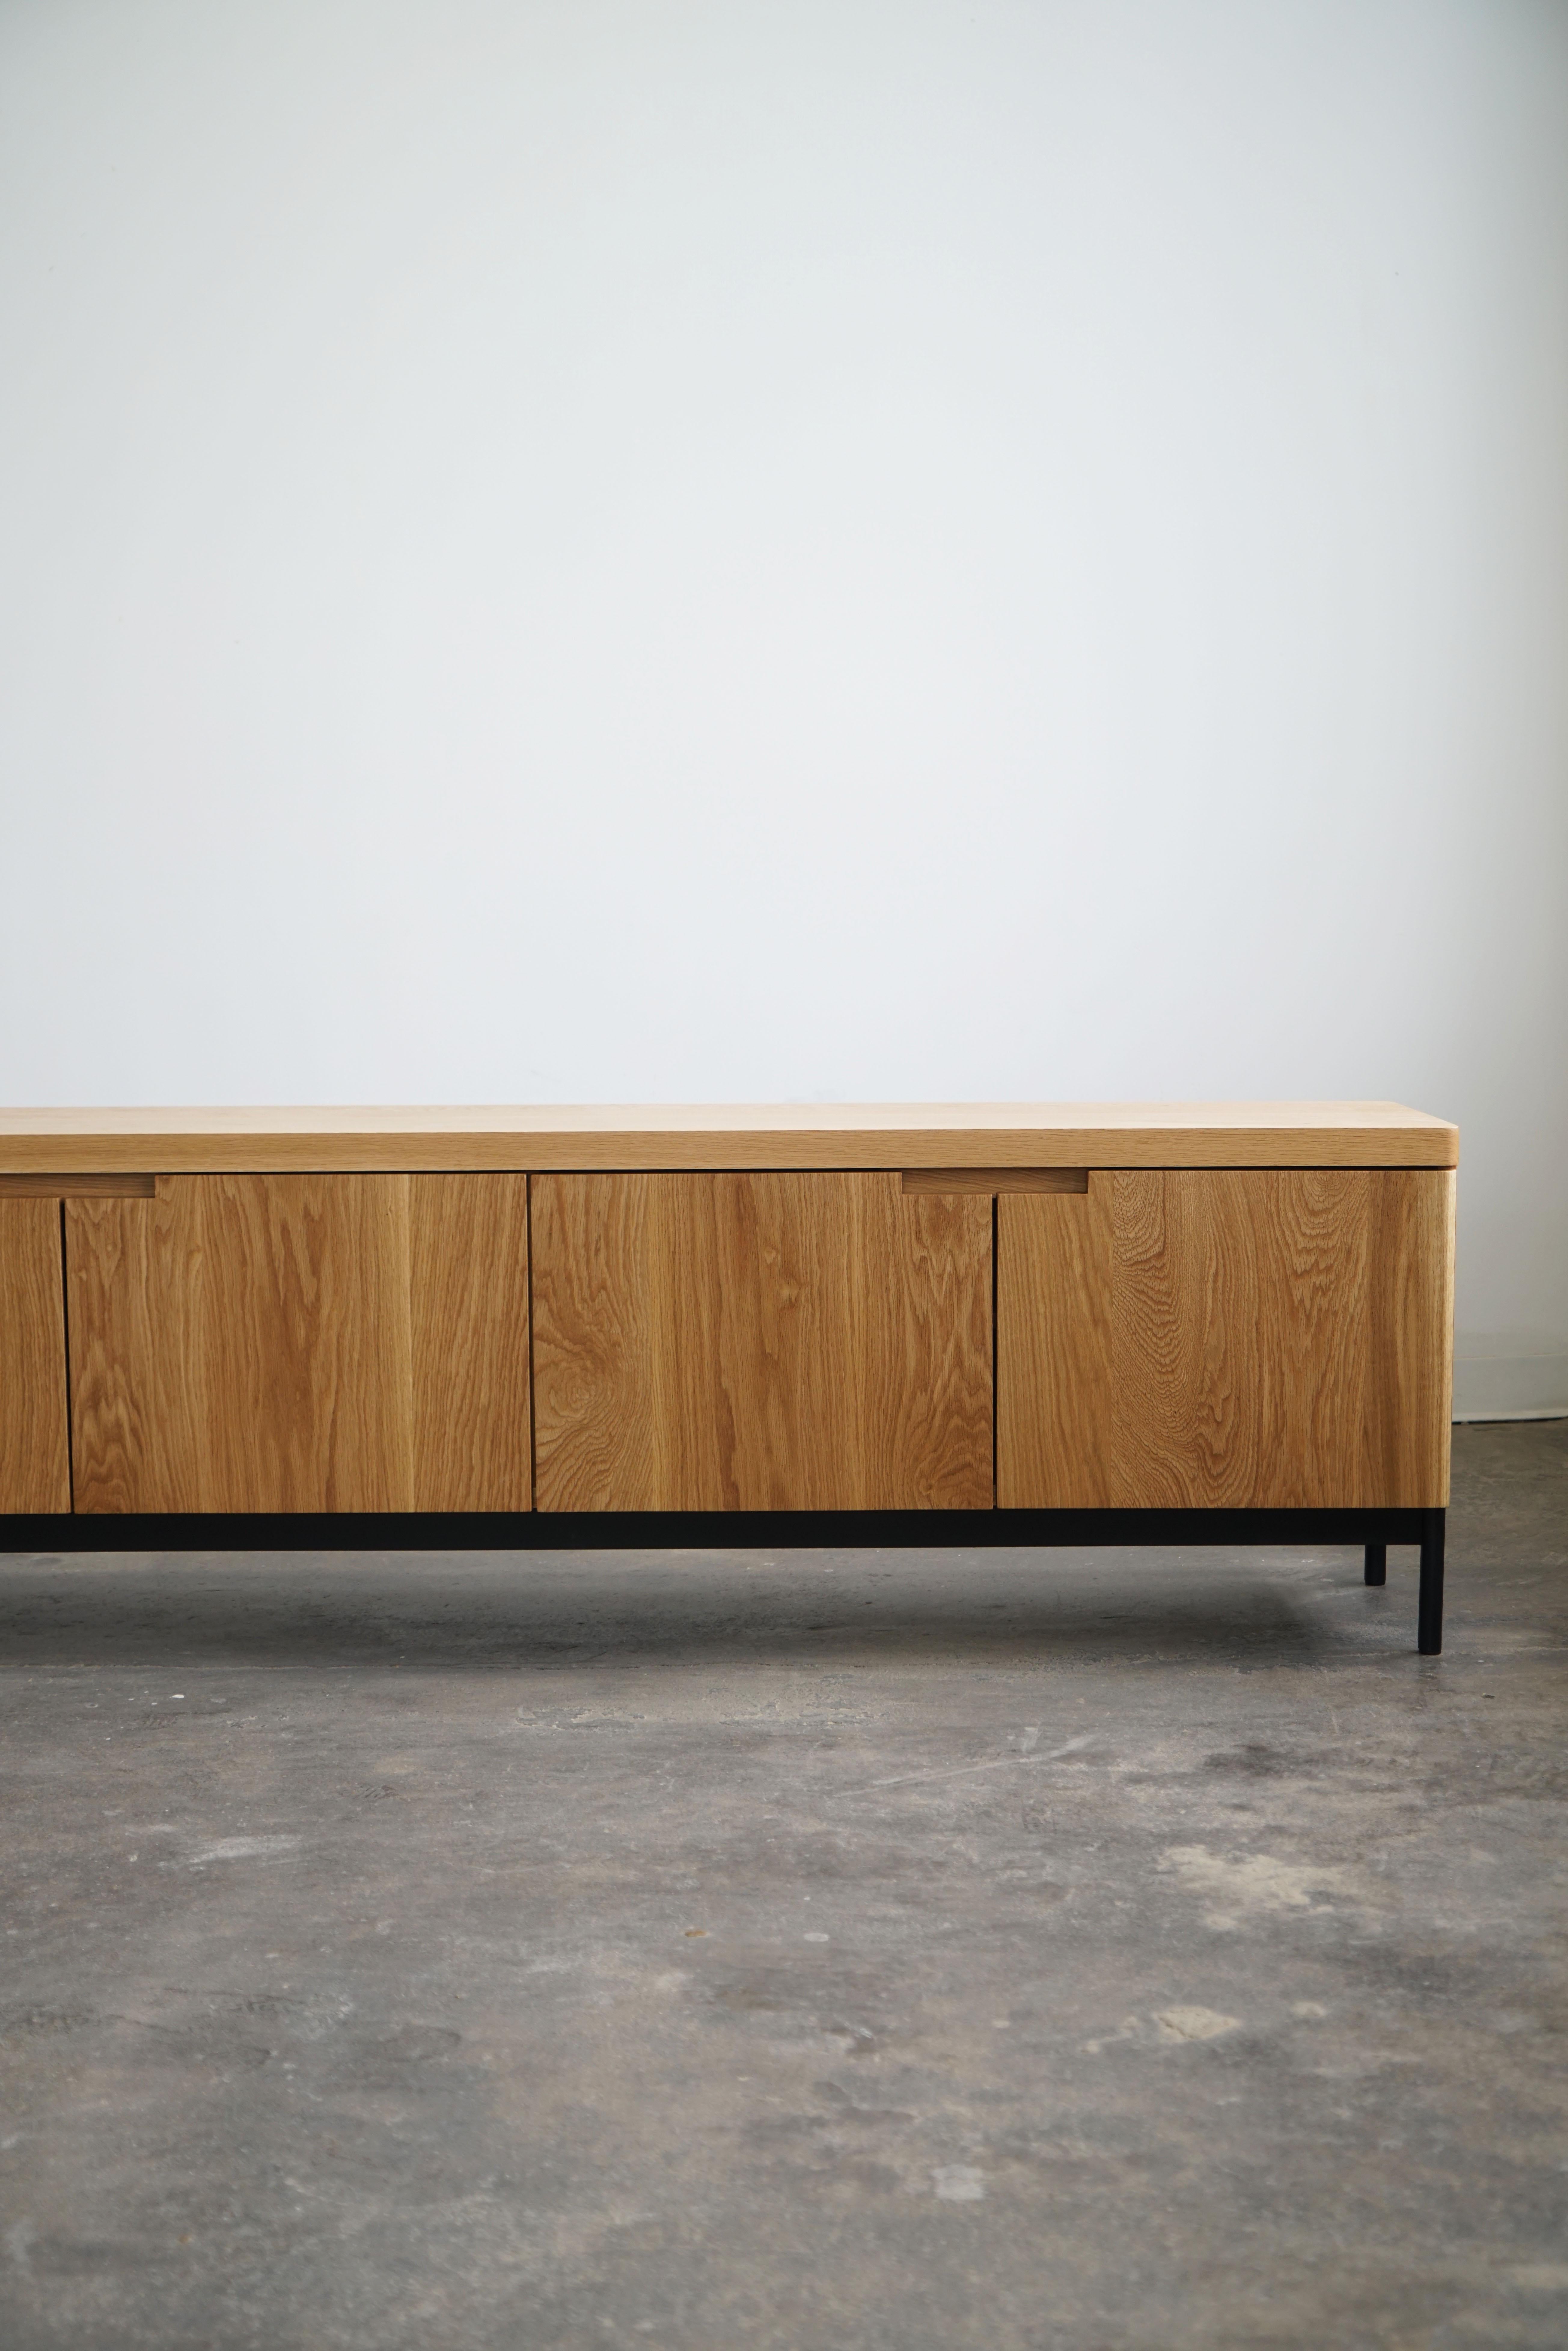 Contemporary solid white oak credenza in a natural finish.
Complete with (6) soft-close doors, adjustable shelves inside, and a steel base. 

Credenza pictured has dimensions of: 120” L x 16” D x 24” H.

This piece is made-to-order, and custom